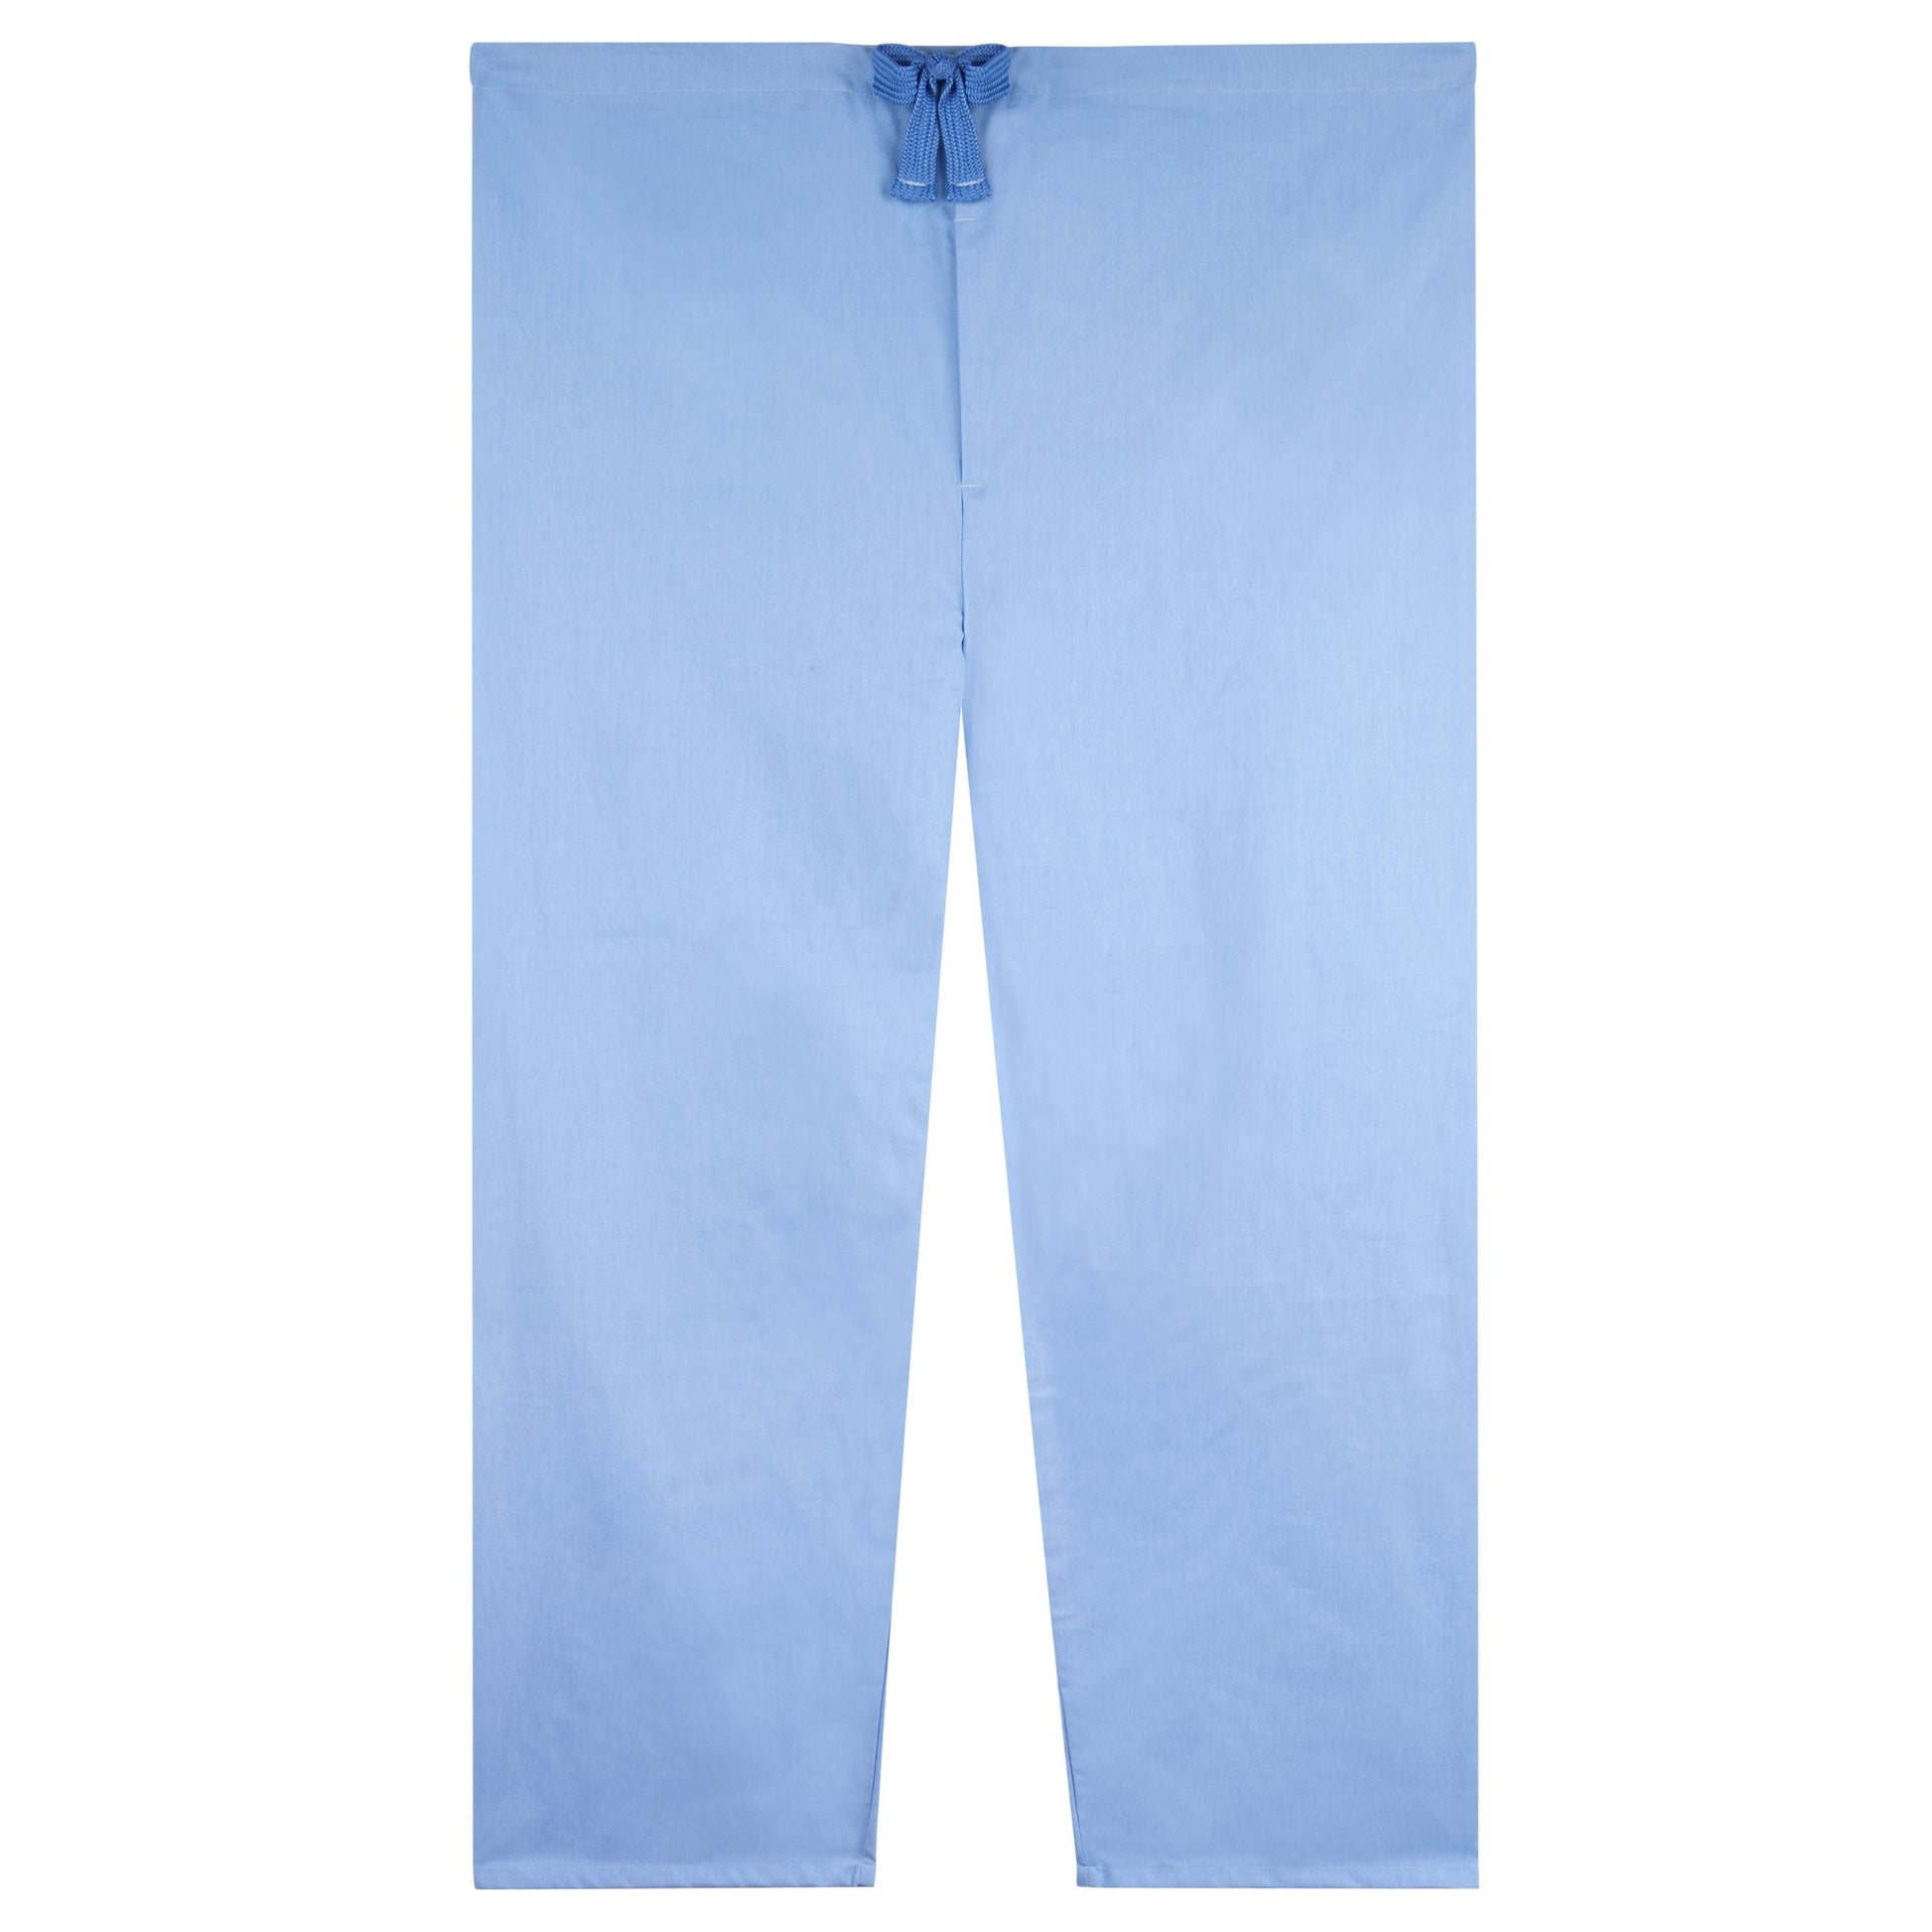 American Dawn | Blue With Light Blue Tie Large Pajama Pant With Drawstring Closure